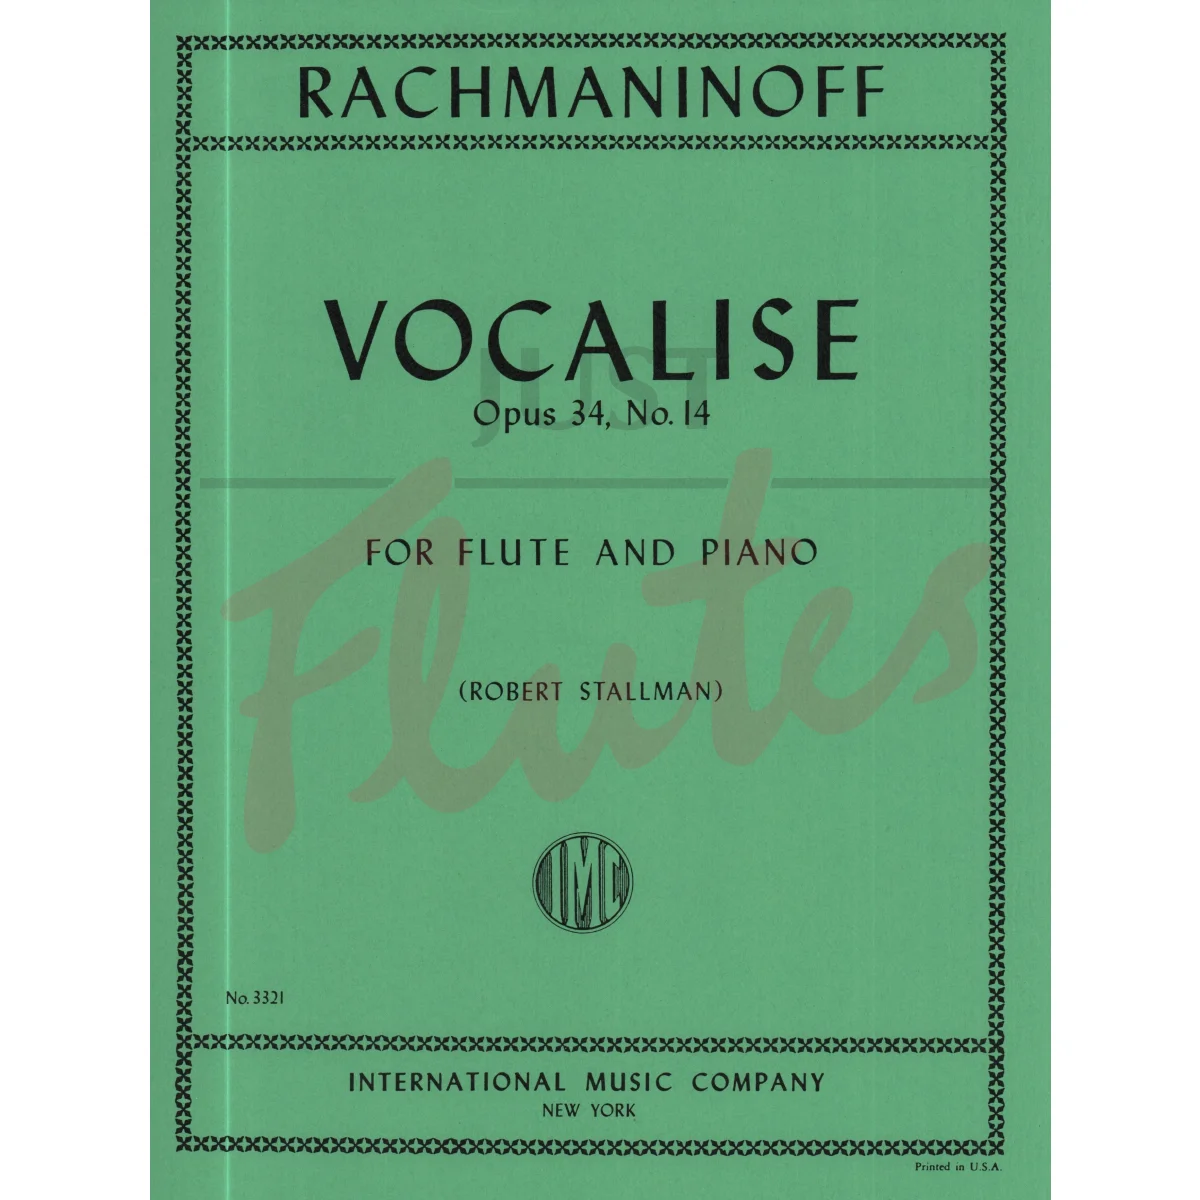 Vocalise for Flute and Piano